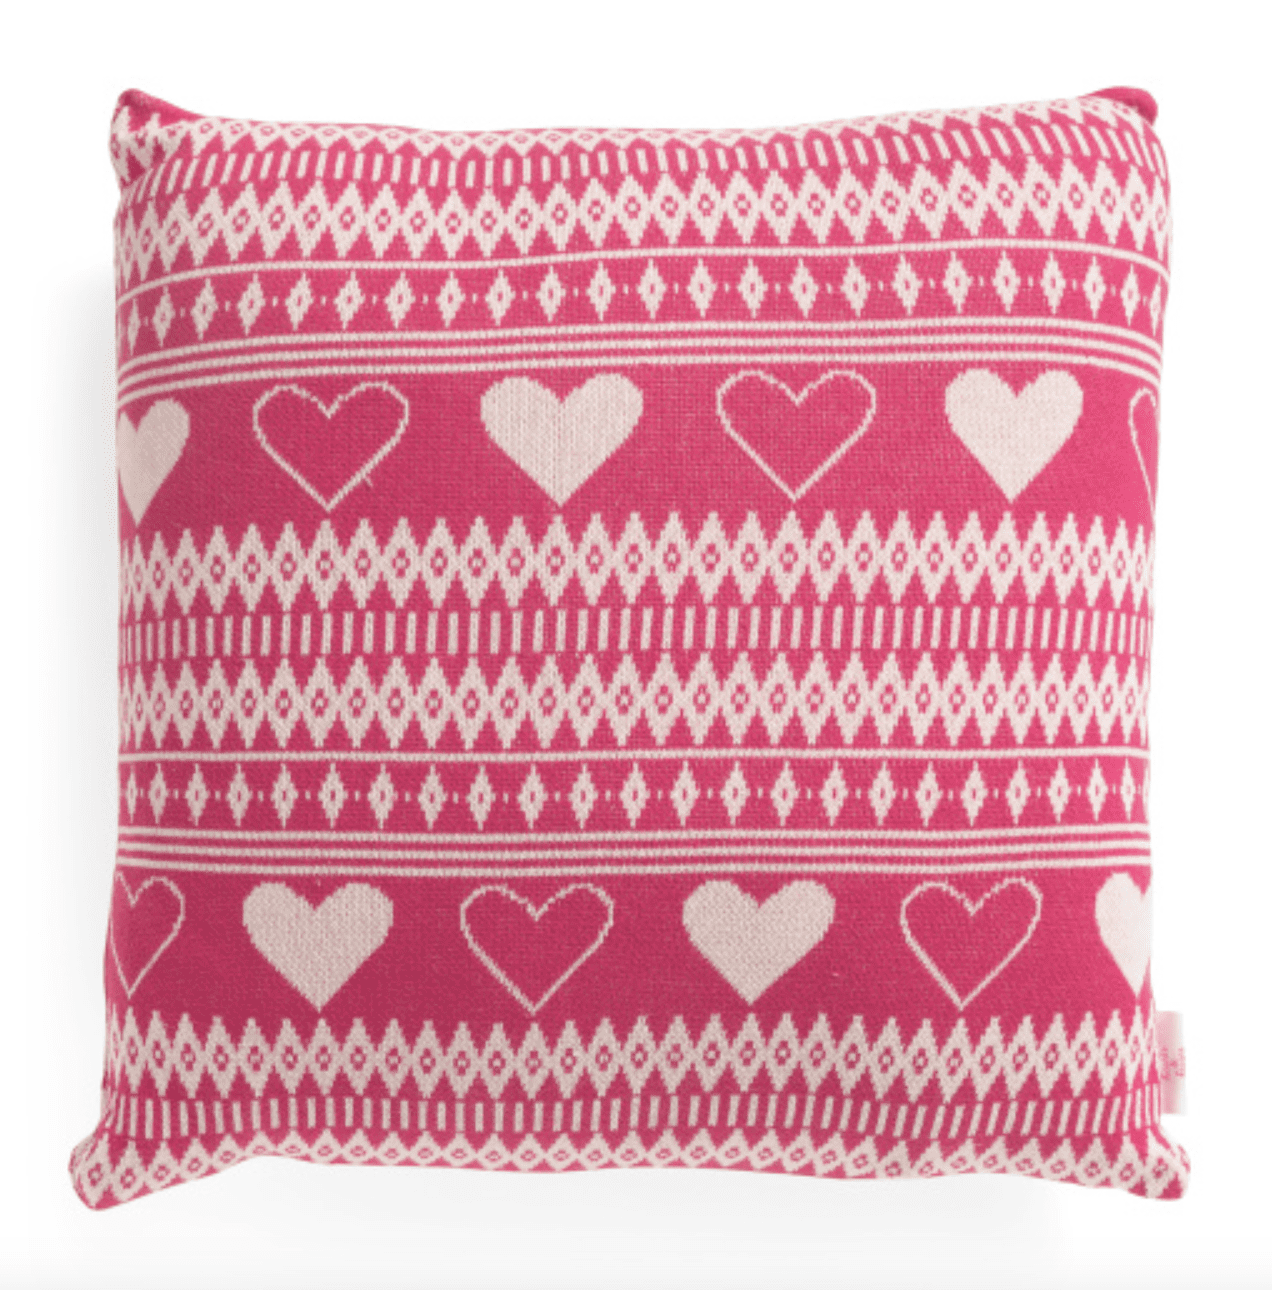 Handcrafted In India 20x20 Throw Pillow